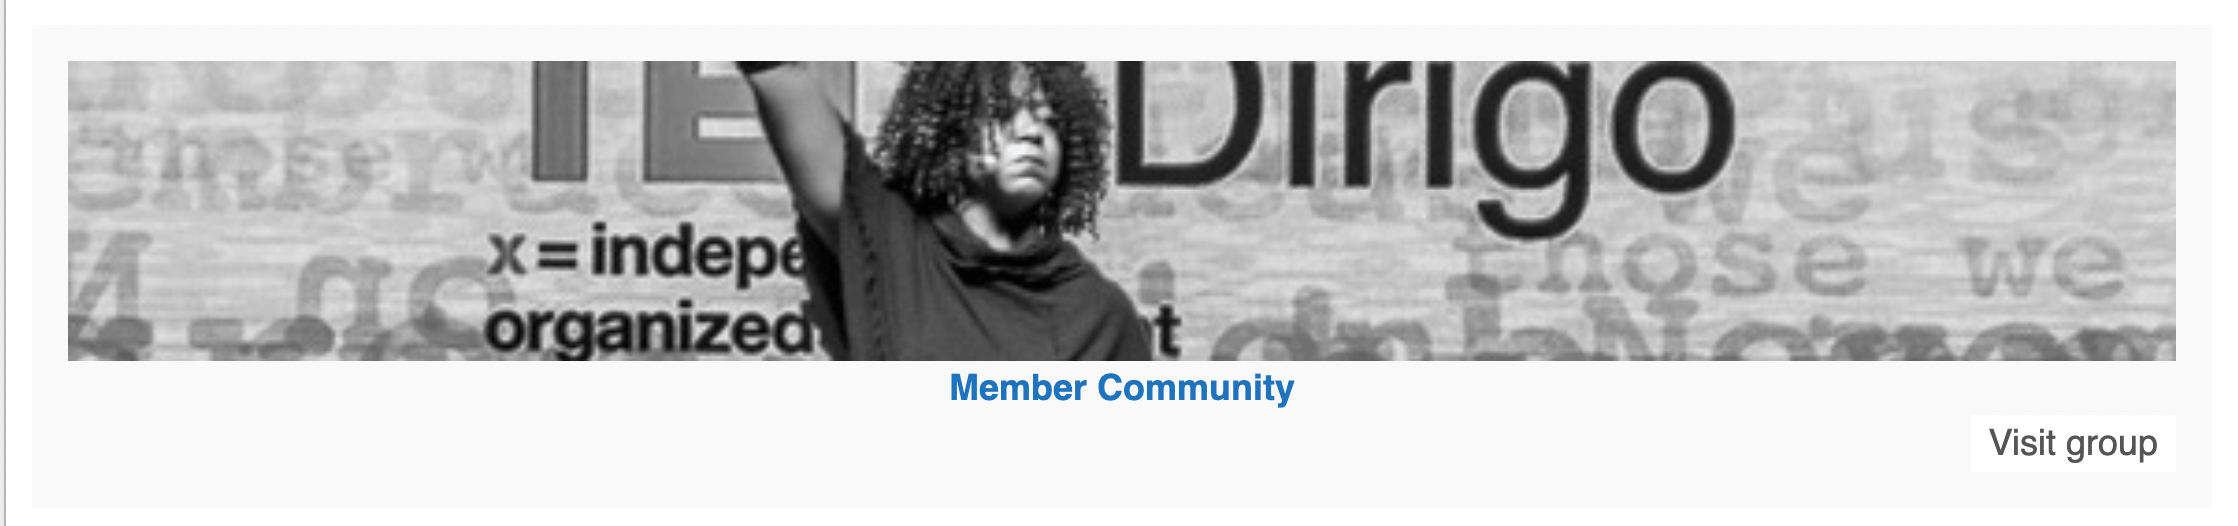 Member Community Page